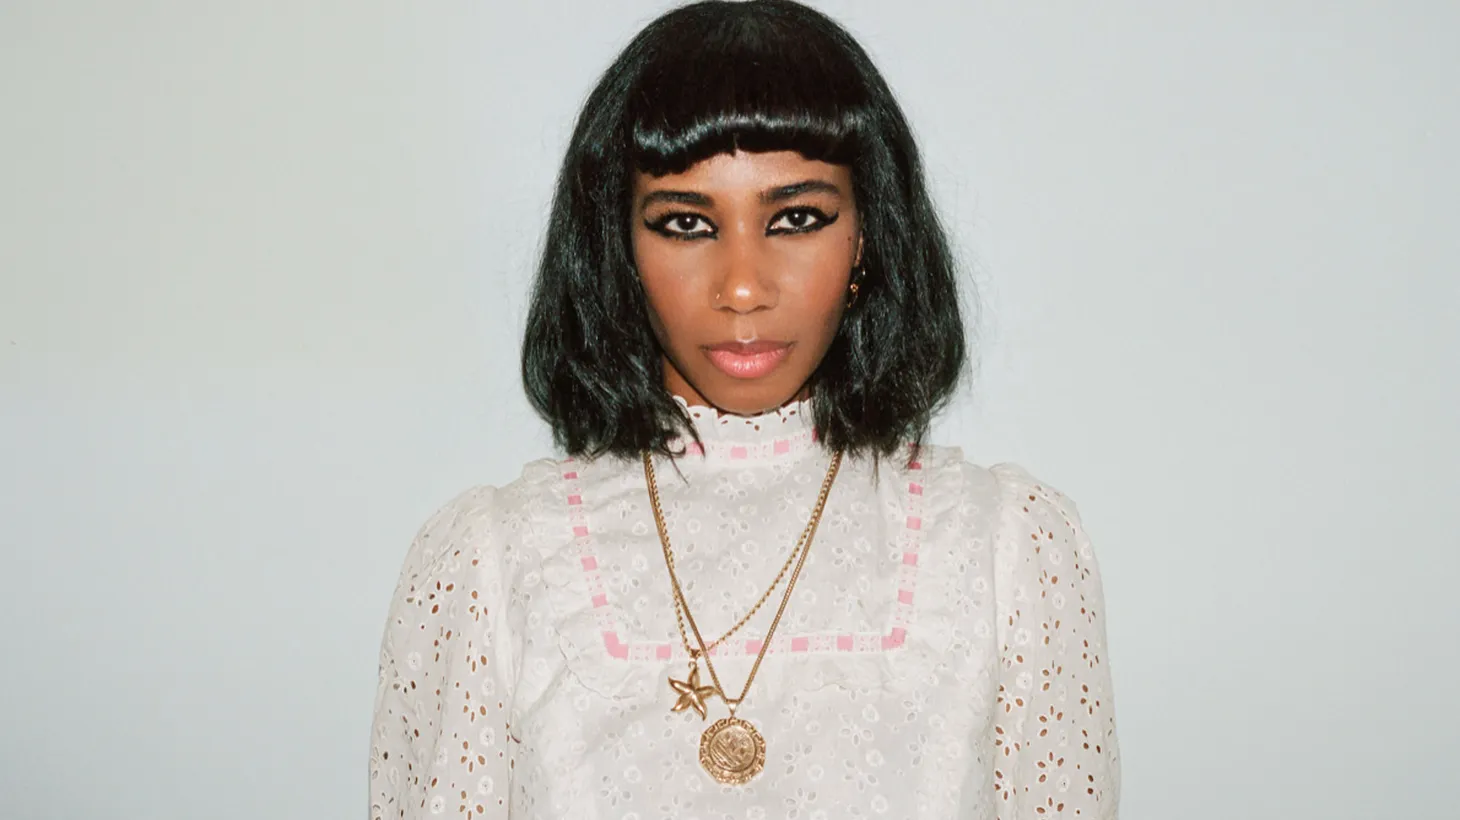 Santigold came back with a splash this summer, dropping a dancehall-inspired mixtape.